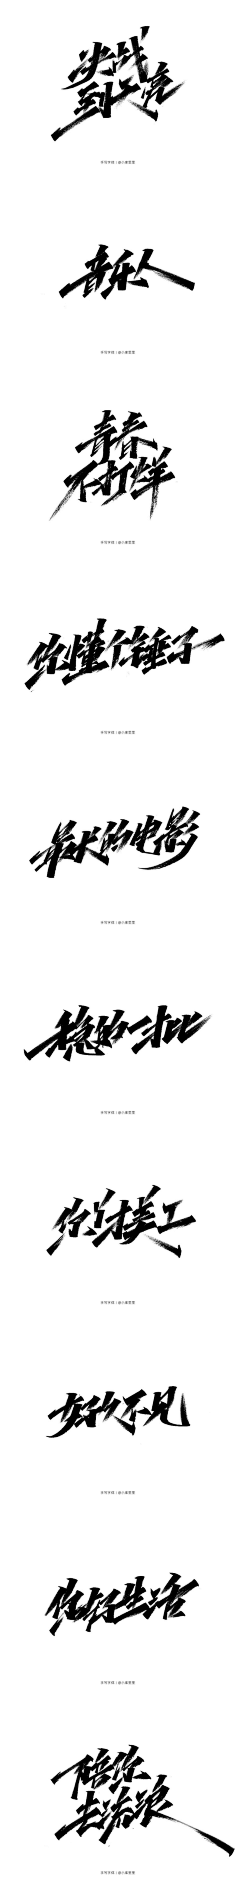 huangdaxiangege采集到字体